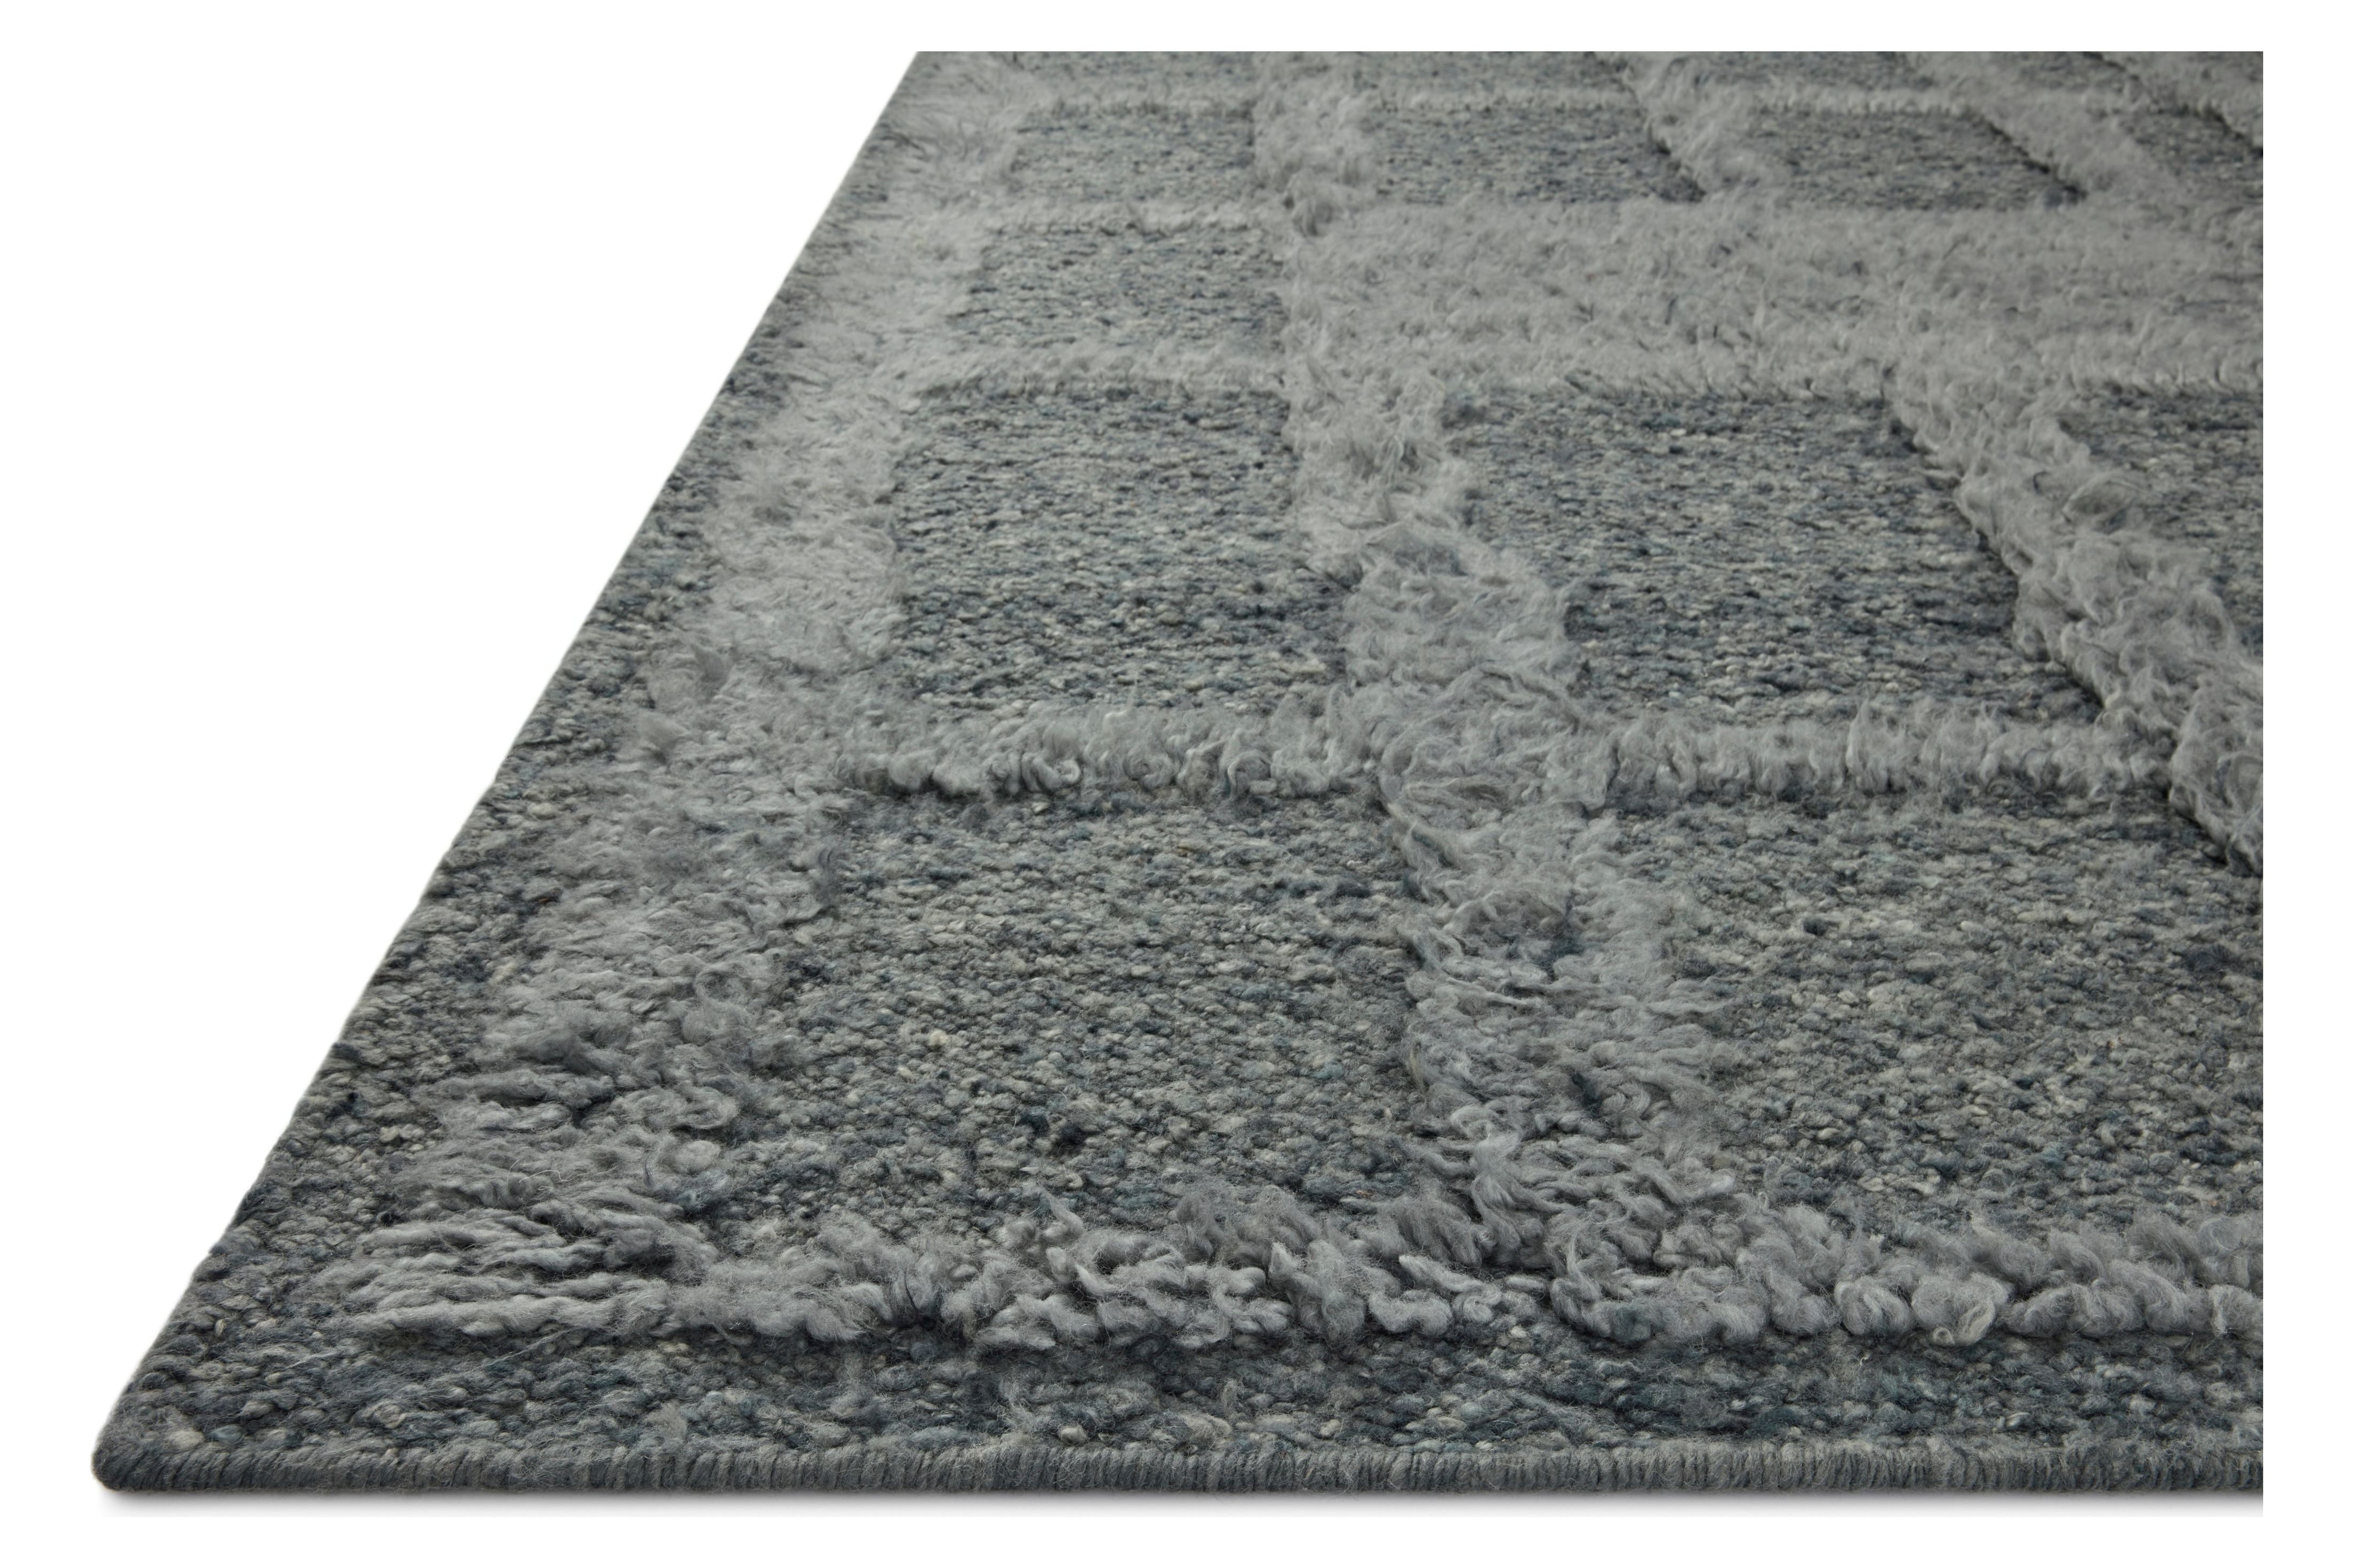 The Cassian Denim rug is a hand-woven wool and cotton area rug with an asymmetrical gridded pattern and high-low texture. The rug’s higher, shaggy pile takes cues from Moroccan designs, while the neutral colors and natural materials make it a cozy addition to any space, especially living rooms and dens. Amethyst Home provides interior design, new home construction design consulting, vintage area rugs, and lighting in the Des Moines metro area.